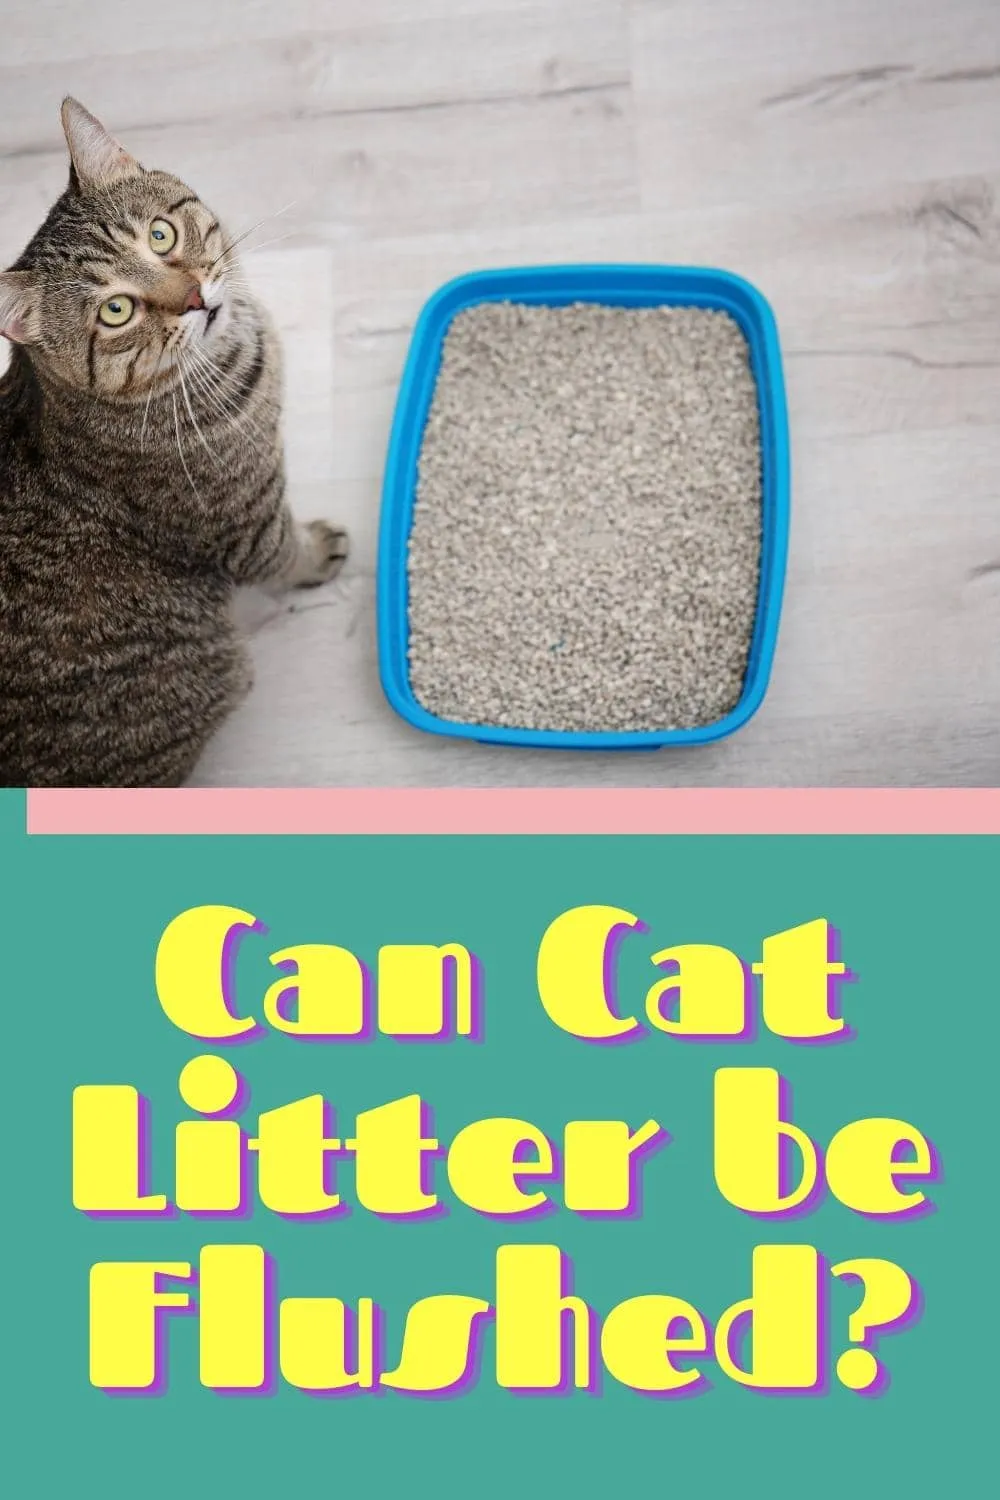 Can Cat Litter be Flushed